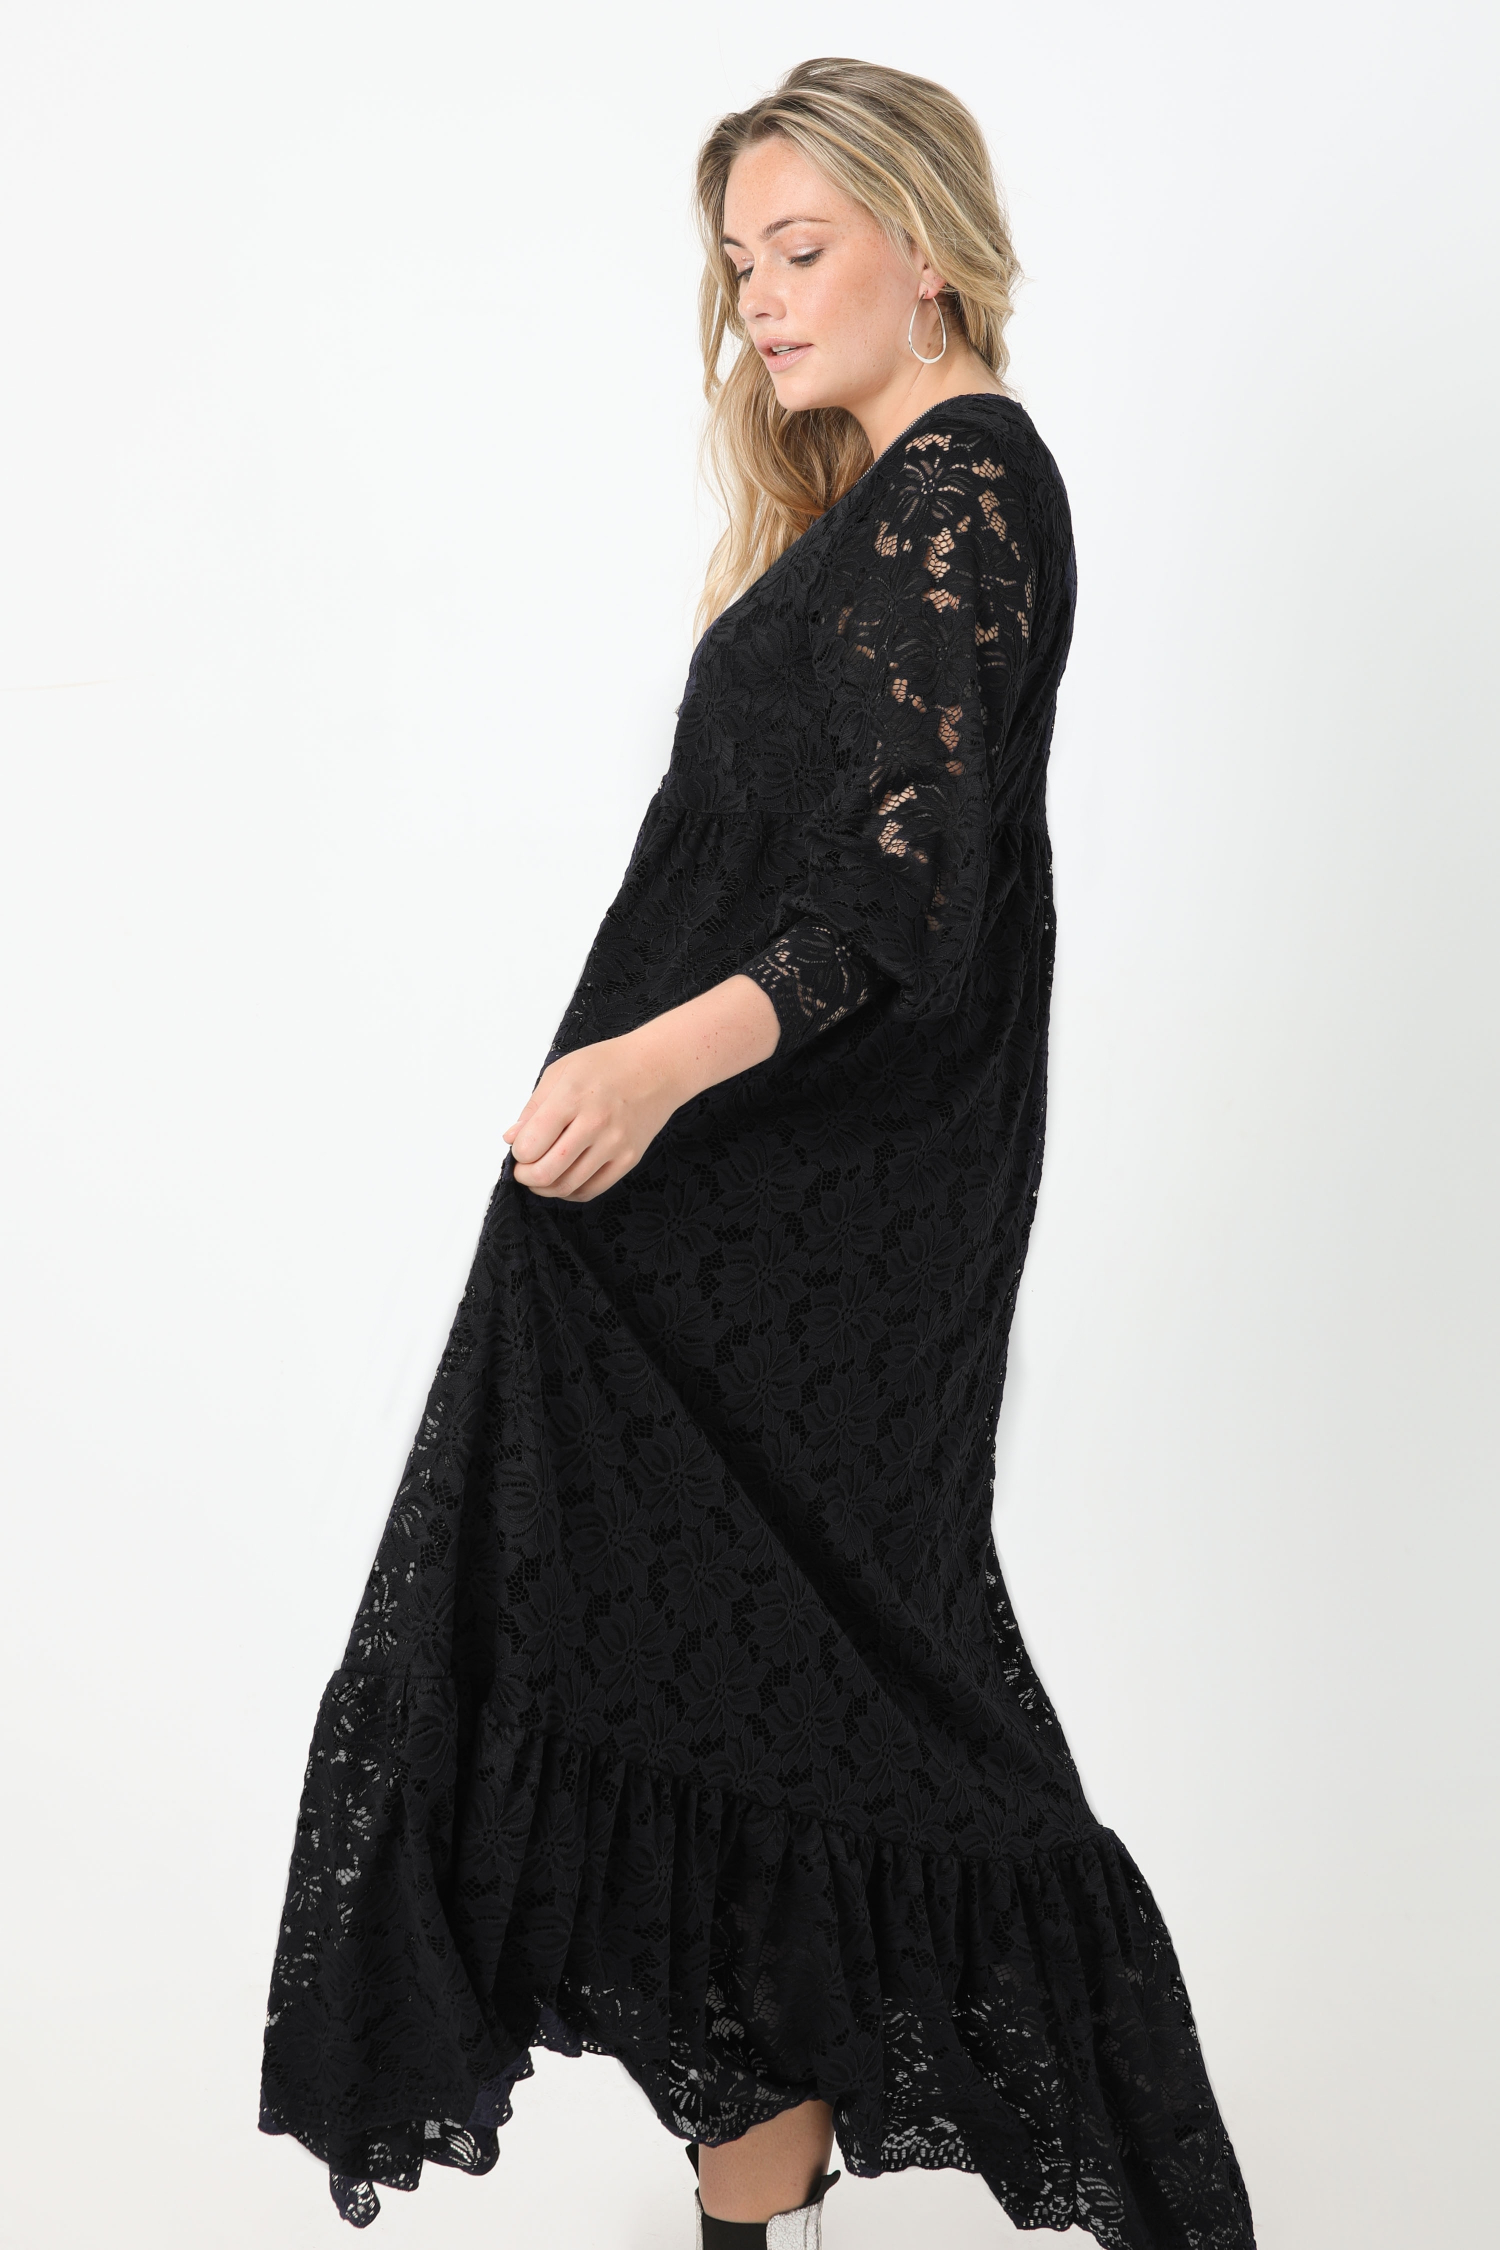 Bohemian style lace dress (expedition 25/31 October)